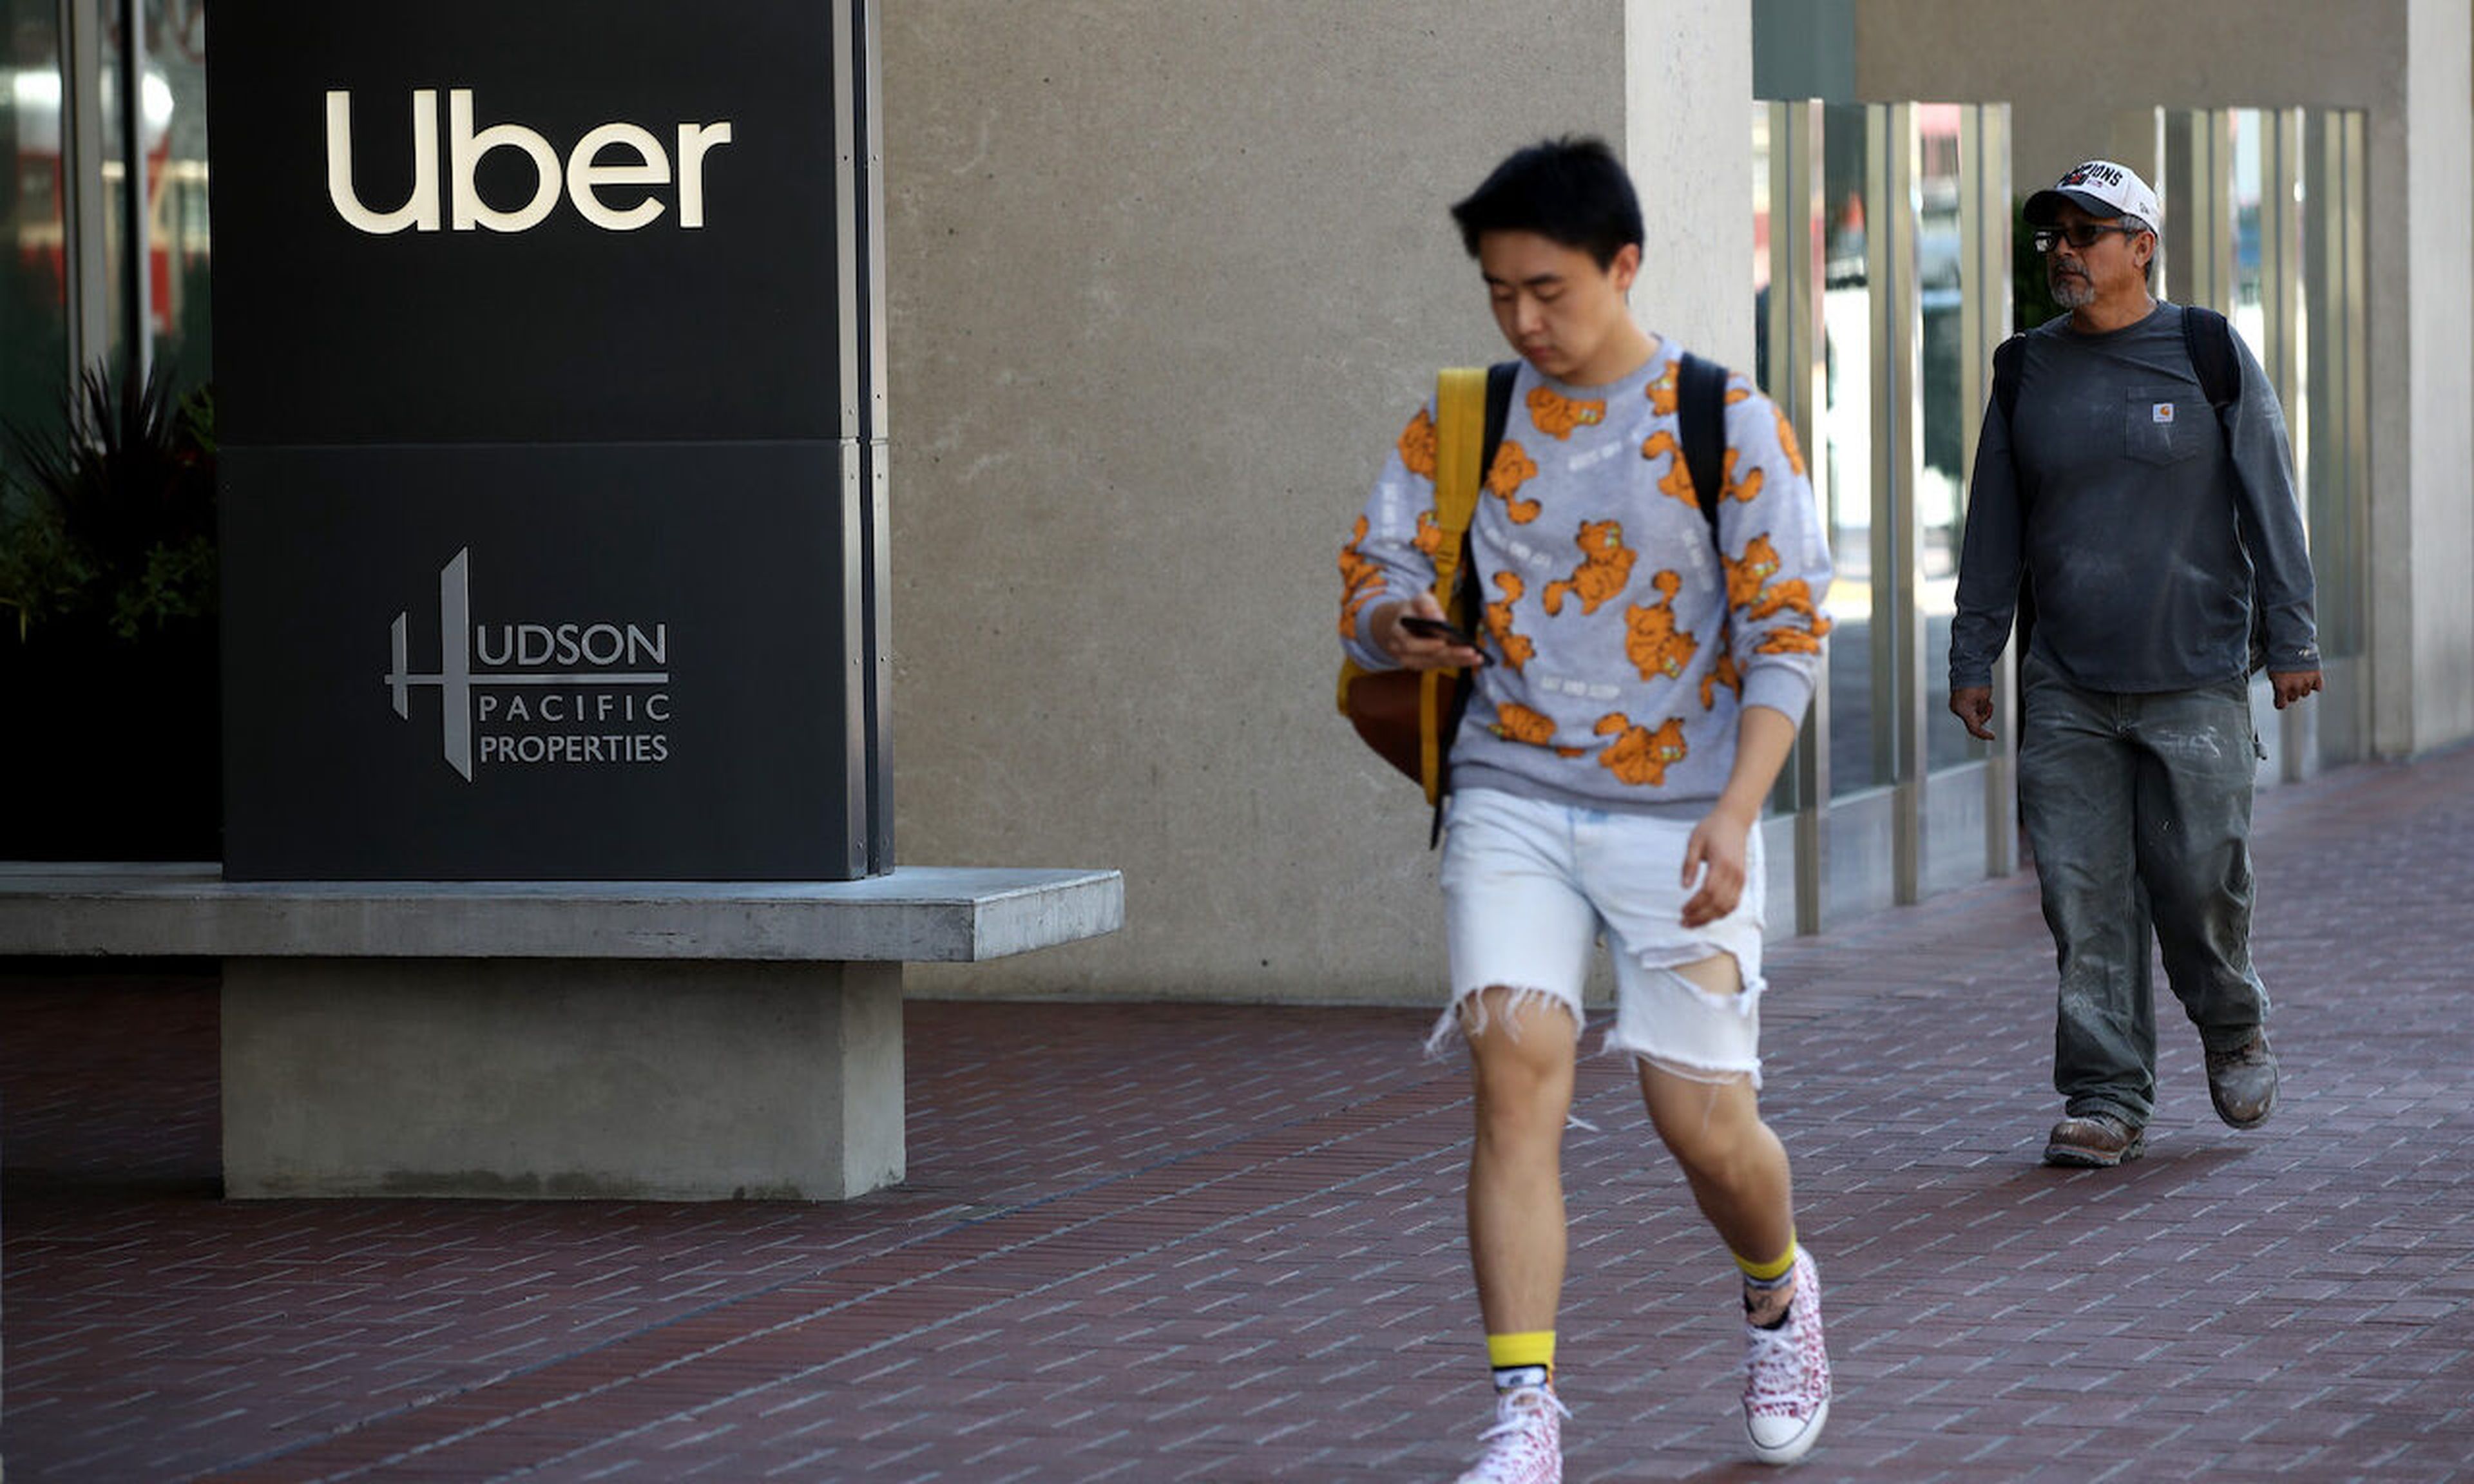 Pedestrians walk by Uber headquarters in San Francisco, California. Uber suffered a recent breach, likely the result of an intruder gaining initial access by contacting an Uber employee over WhatsApp. (Photo by Justin Sullivan/Getty Images)